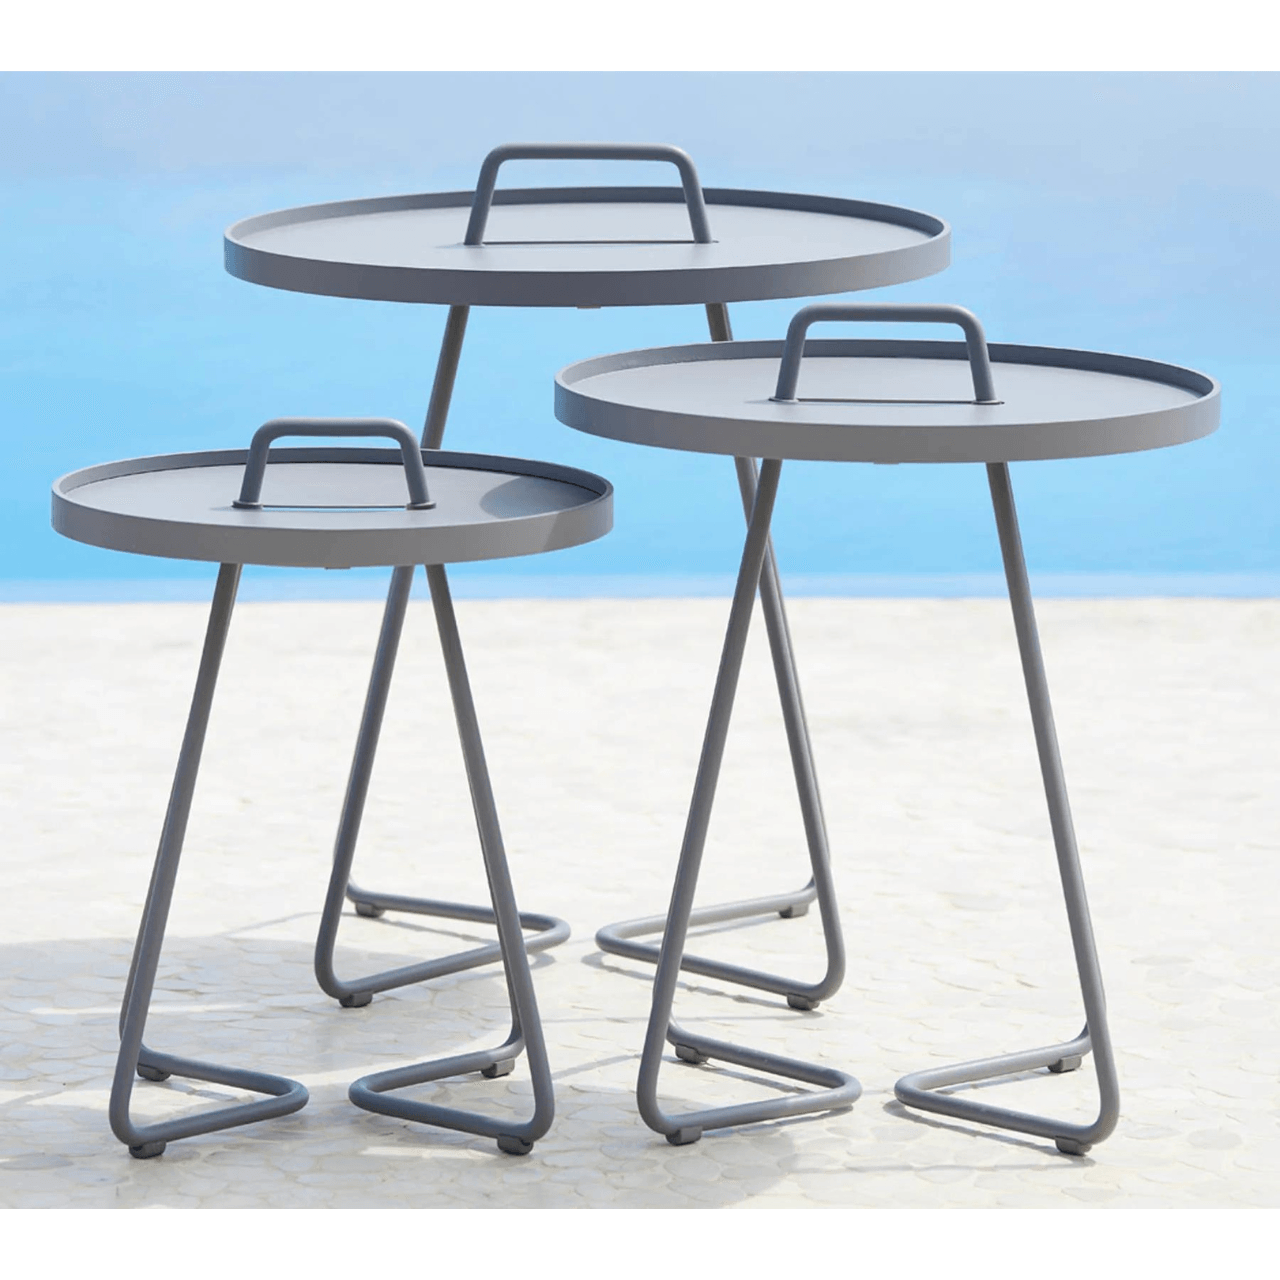 Boxhill's On-The-Move light grey outdoor round side table in 3 different sizes 